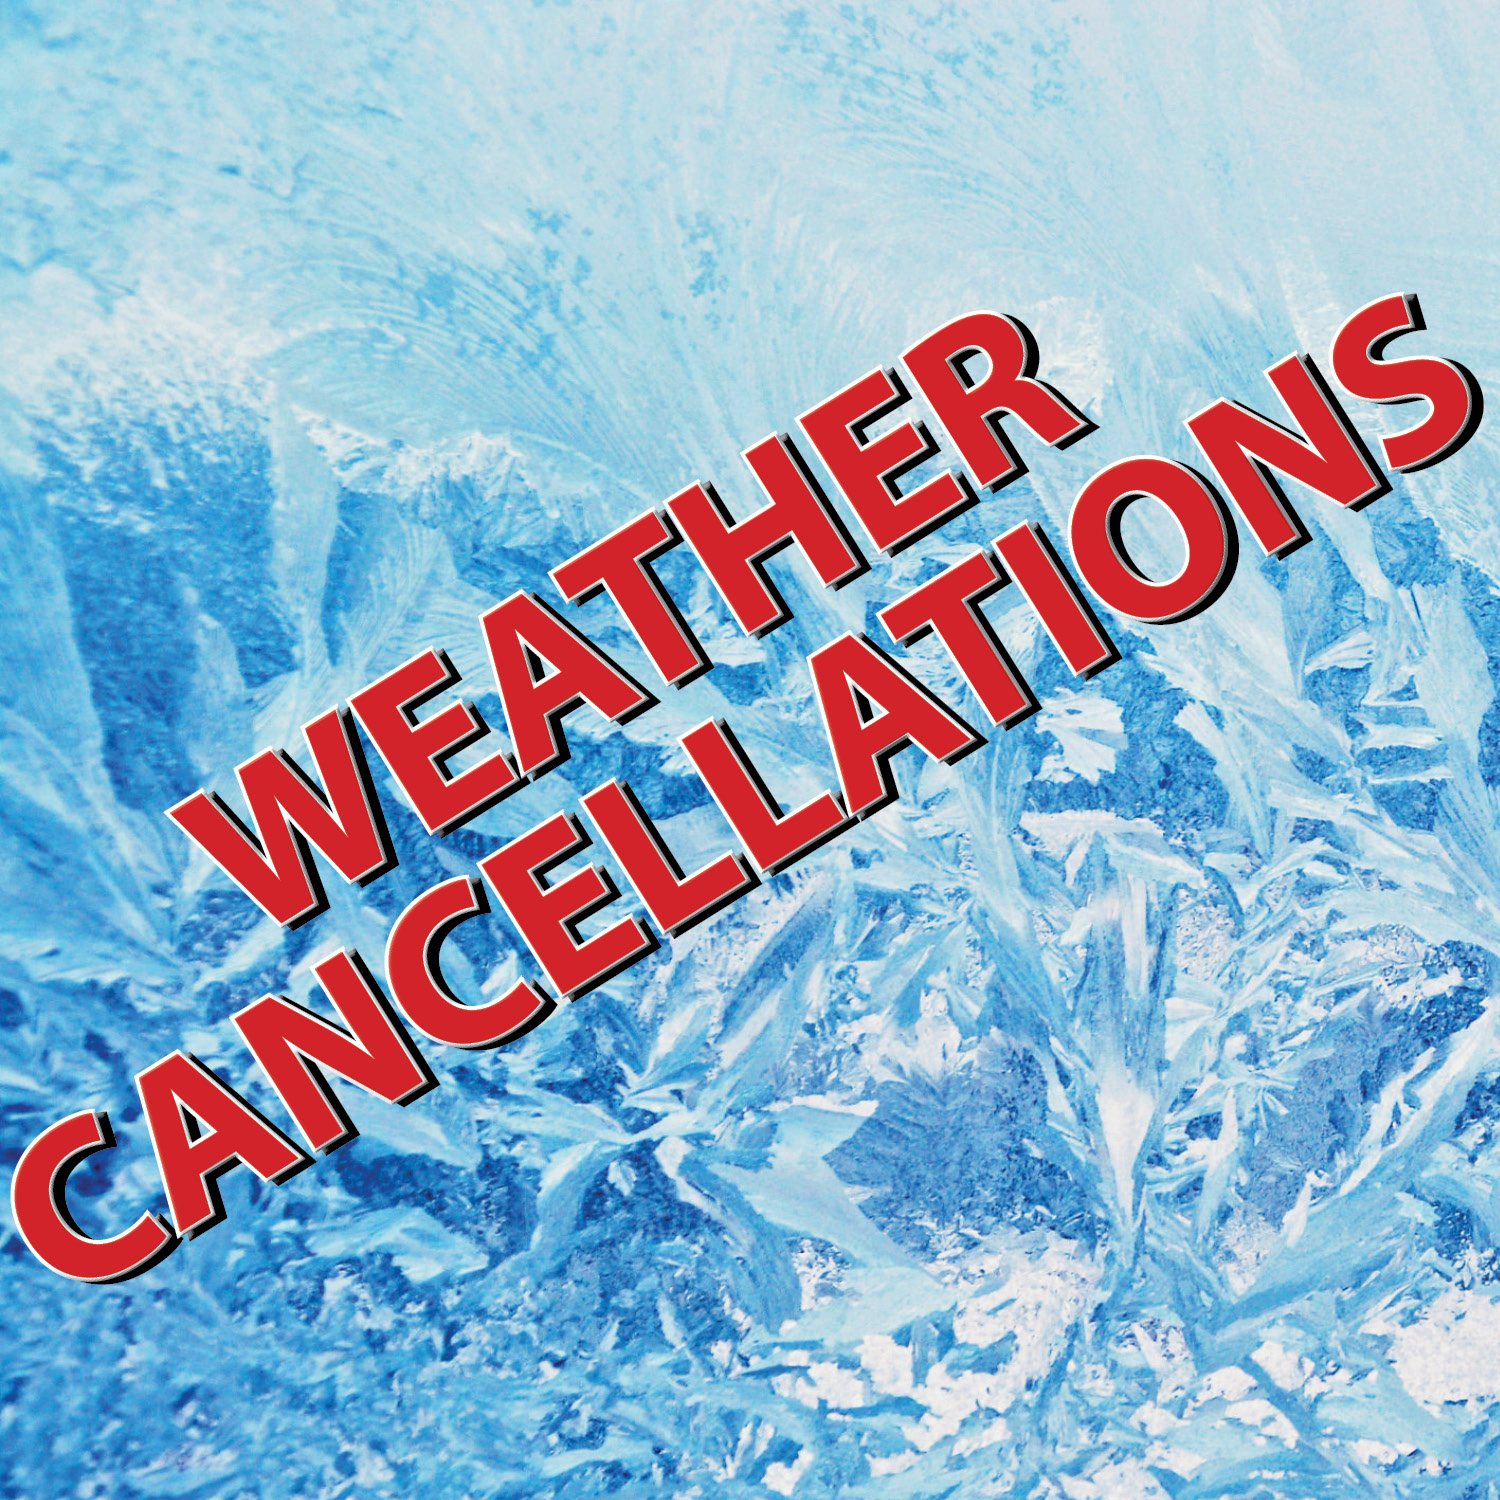 Events canceled for Feb. 9 due to weather